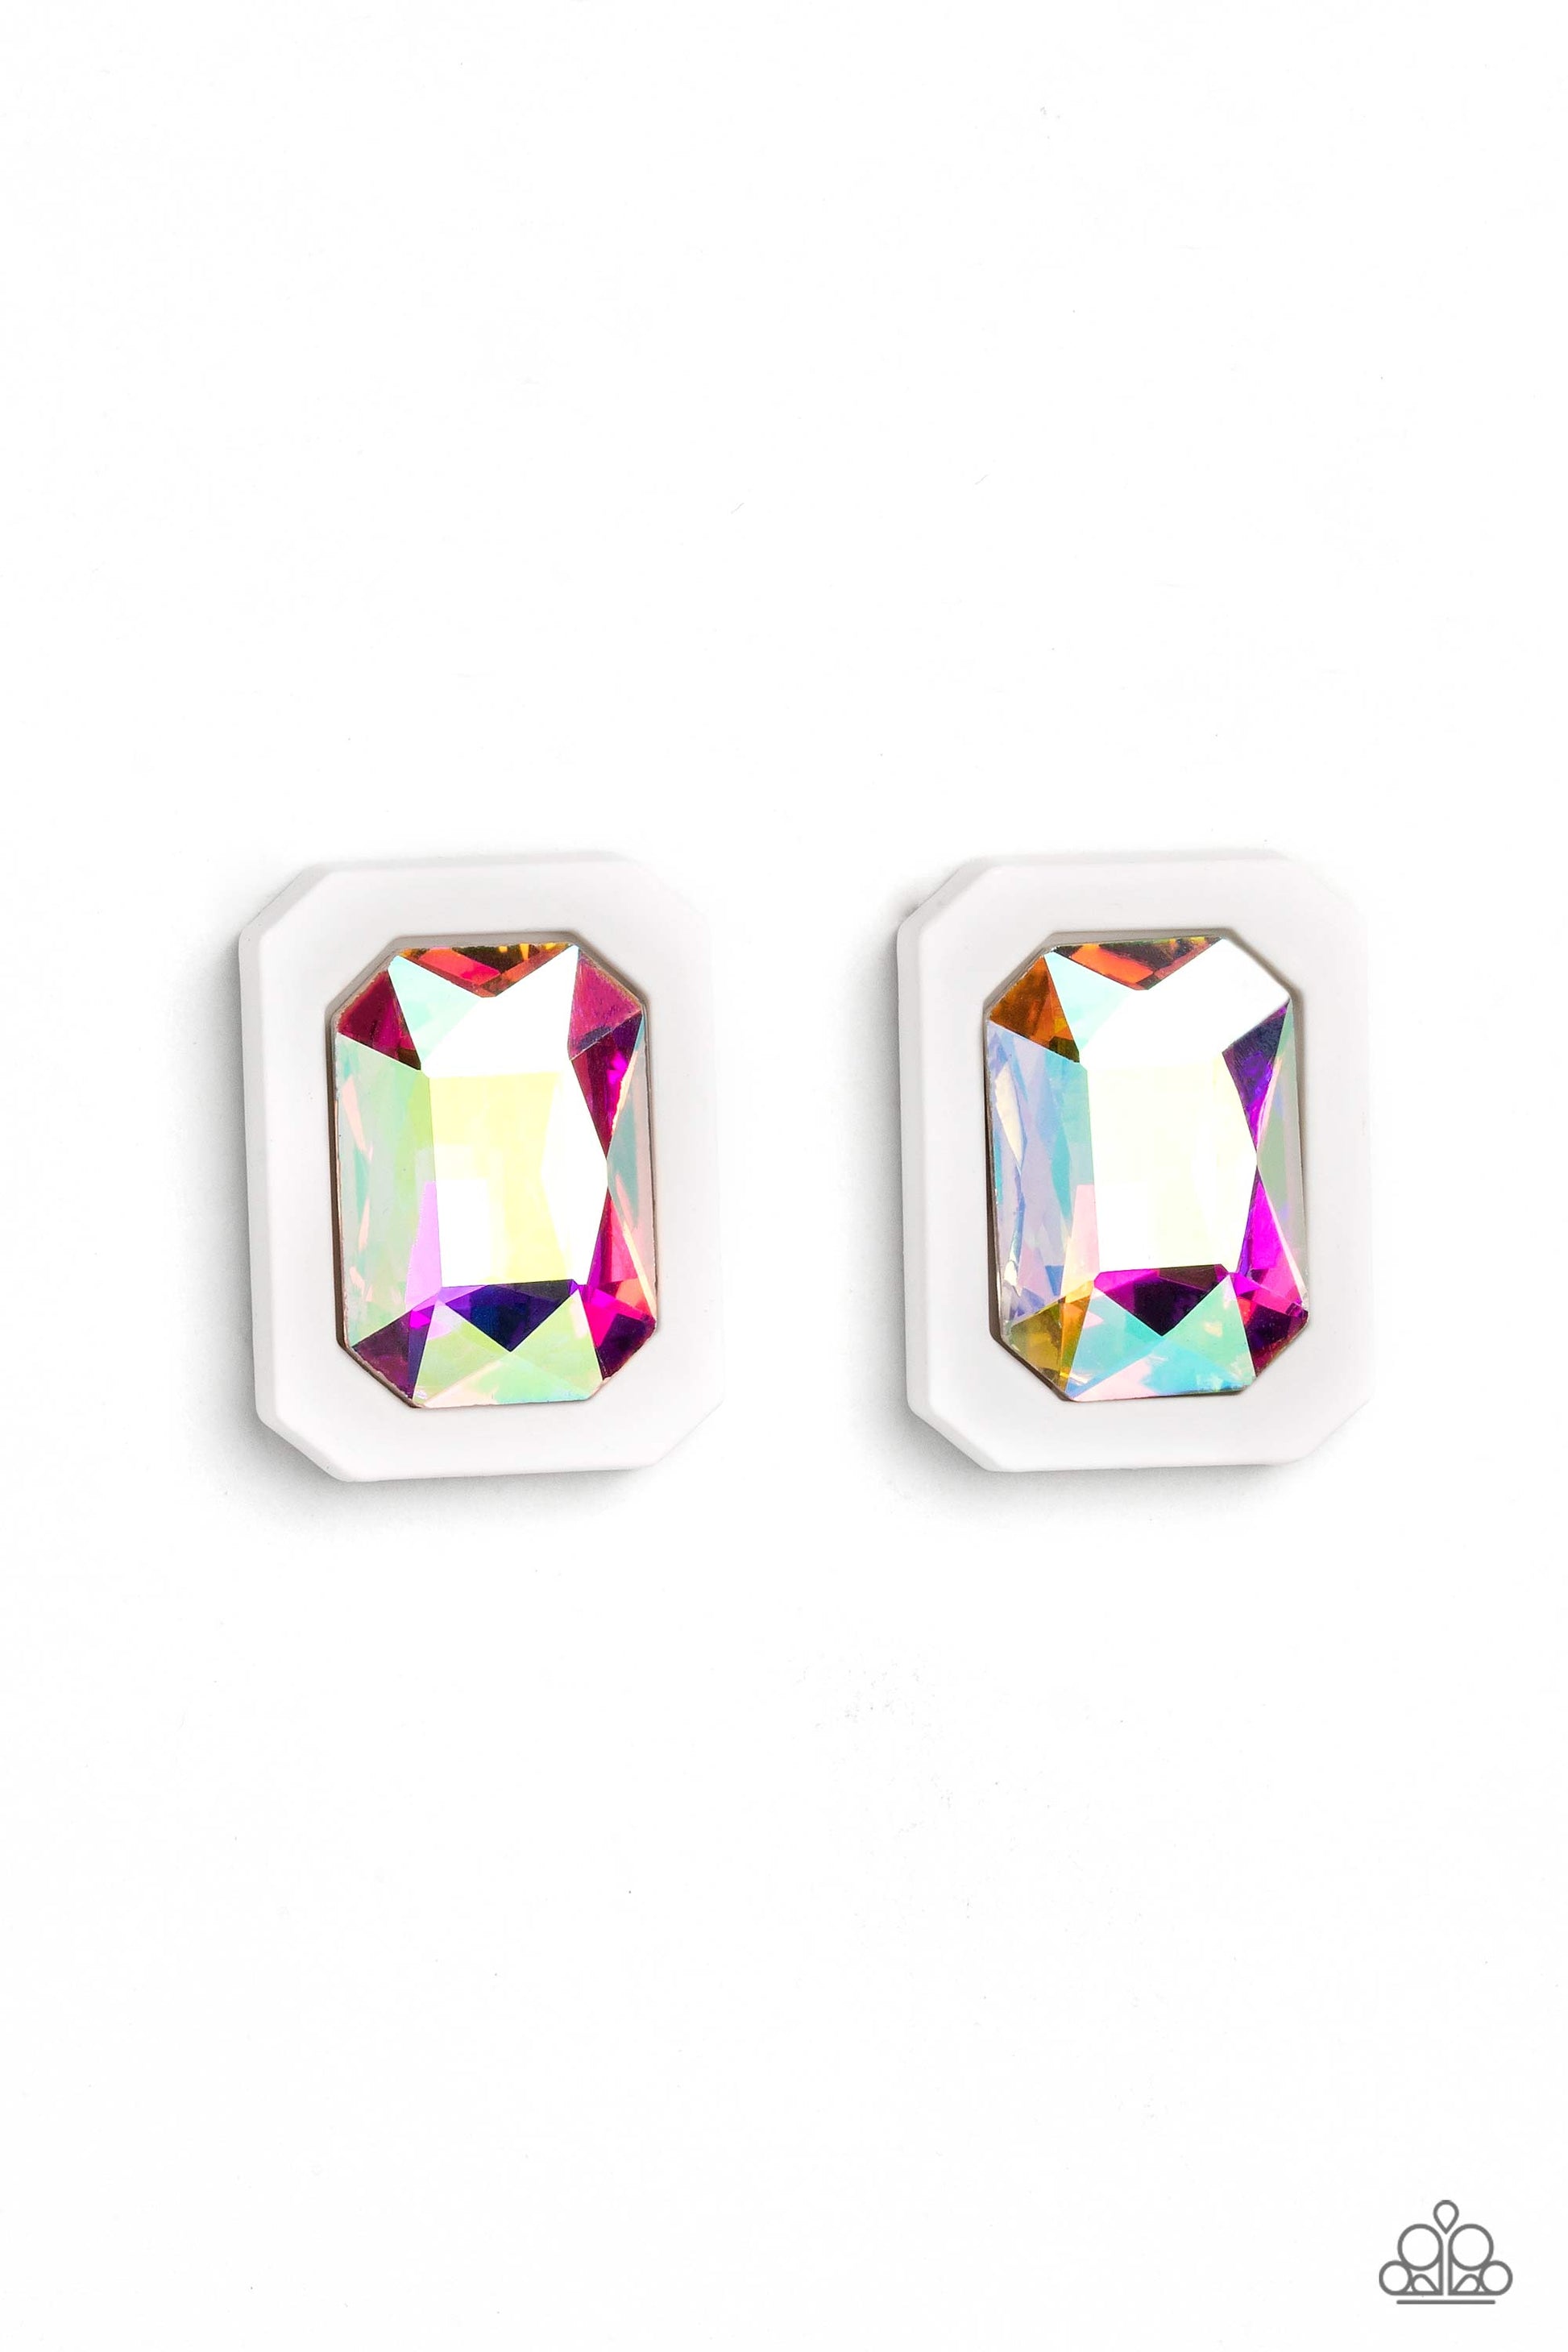 Standing out against a white rubber backdrop, an oversized, faceted emerald-cut iridescent gem shimmers and shines for an edgy sparkle against the ear. Earring attaches to a standard post fitting. Due to its prismatic palette, color may vary.  Sold as one pair of post earrings.